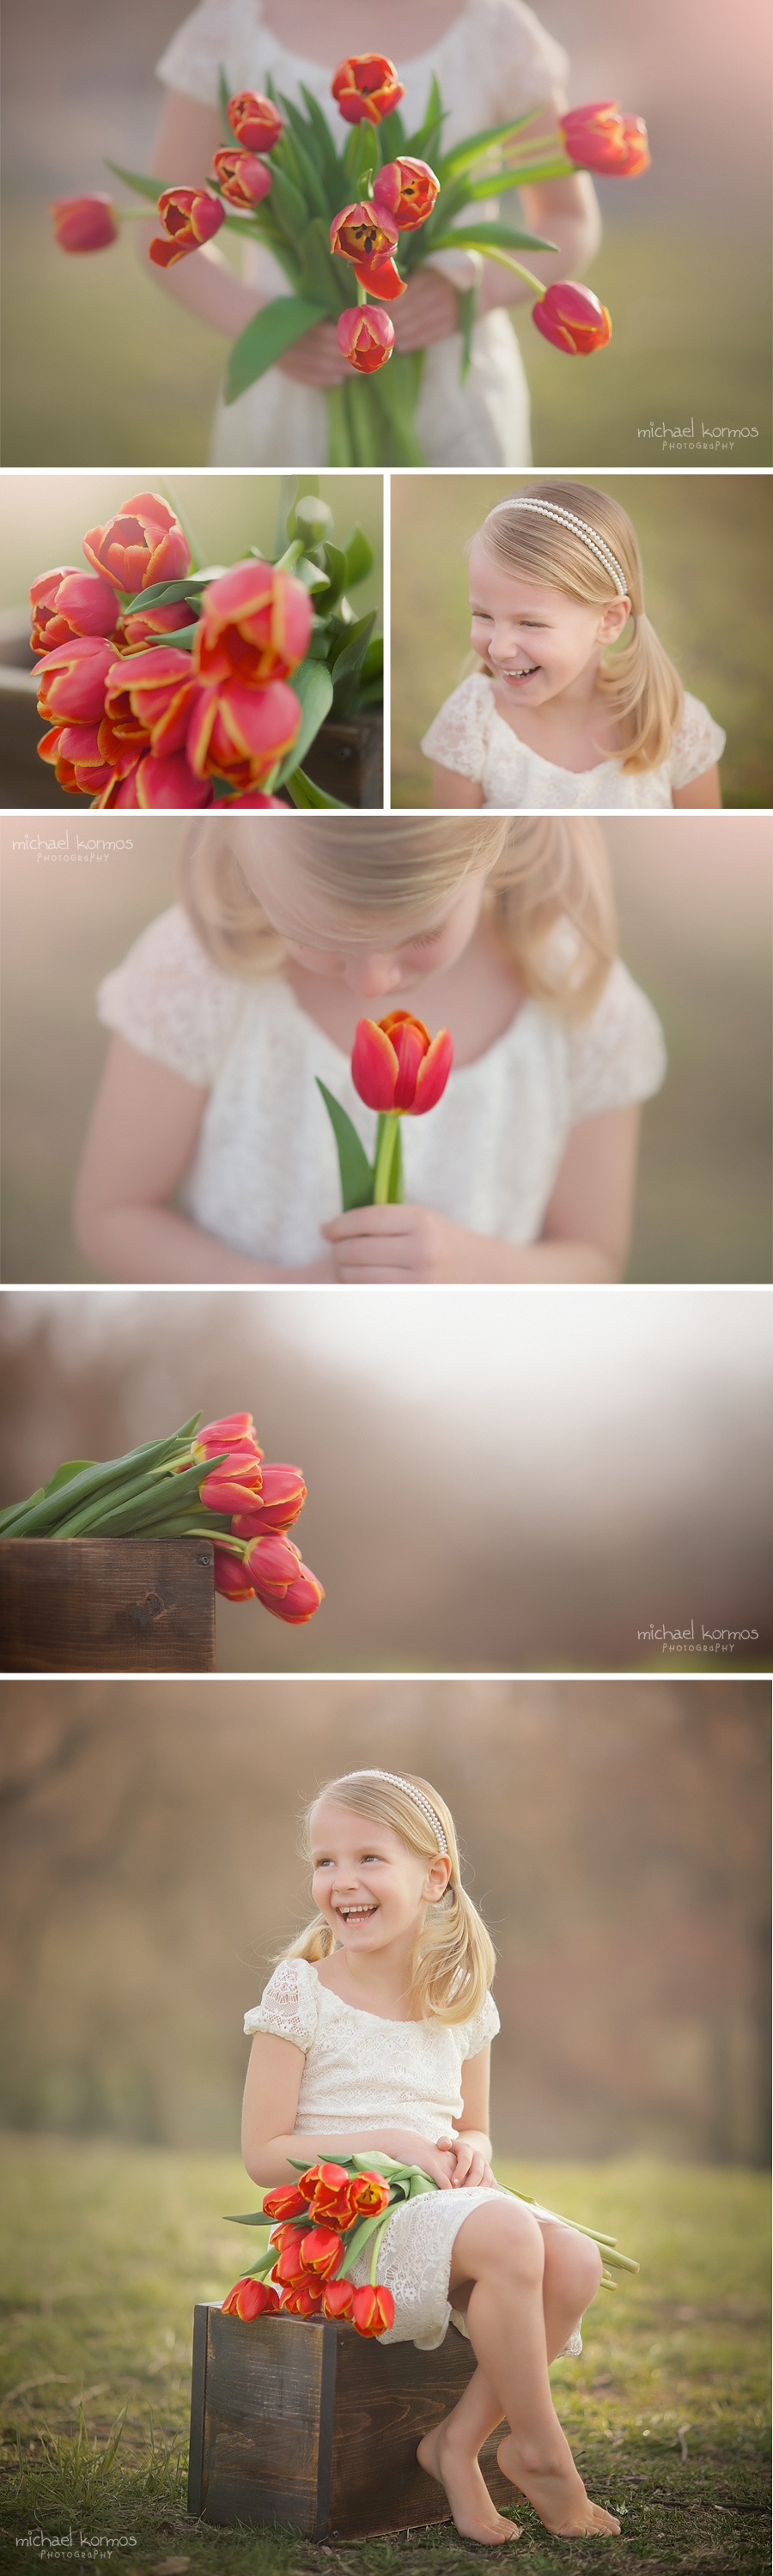 Blonde girl with orange tulips in Springtime photographed by Michael Kormos